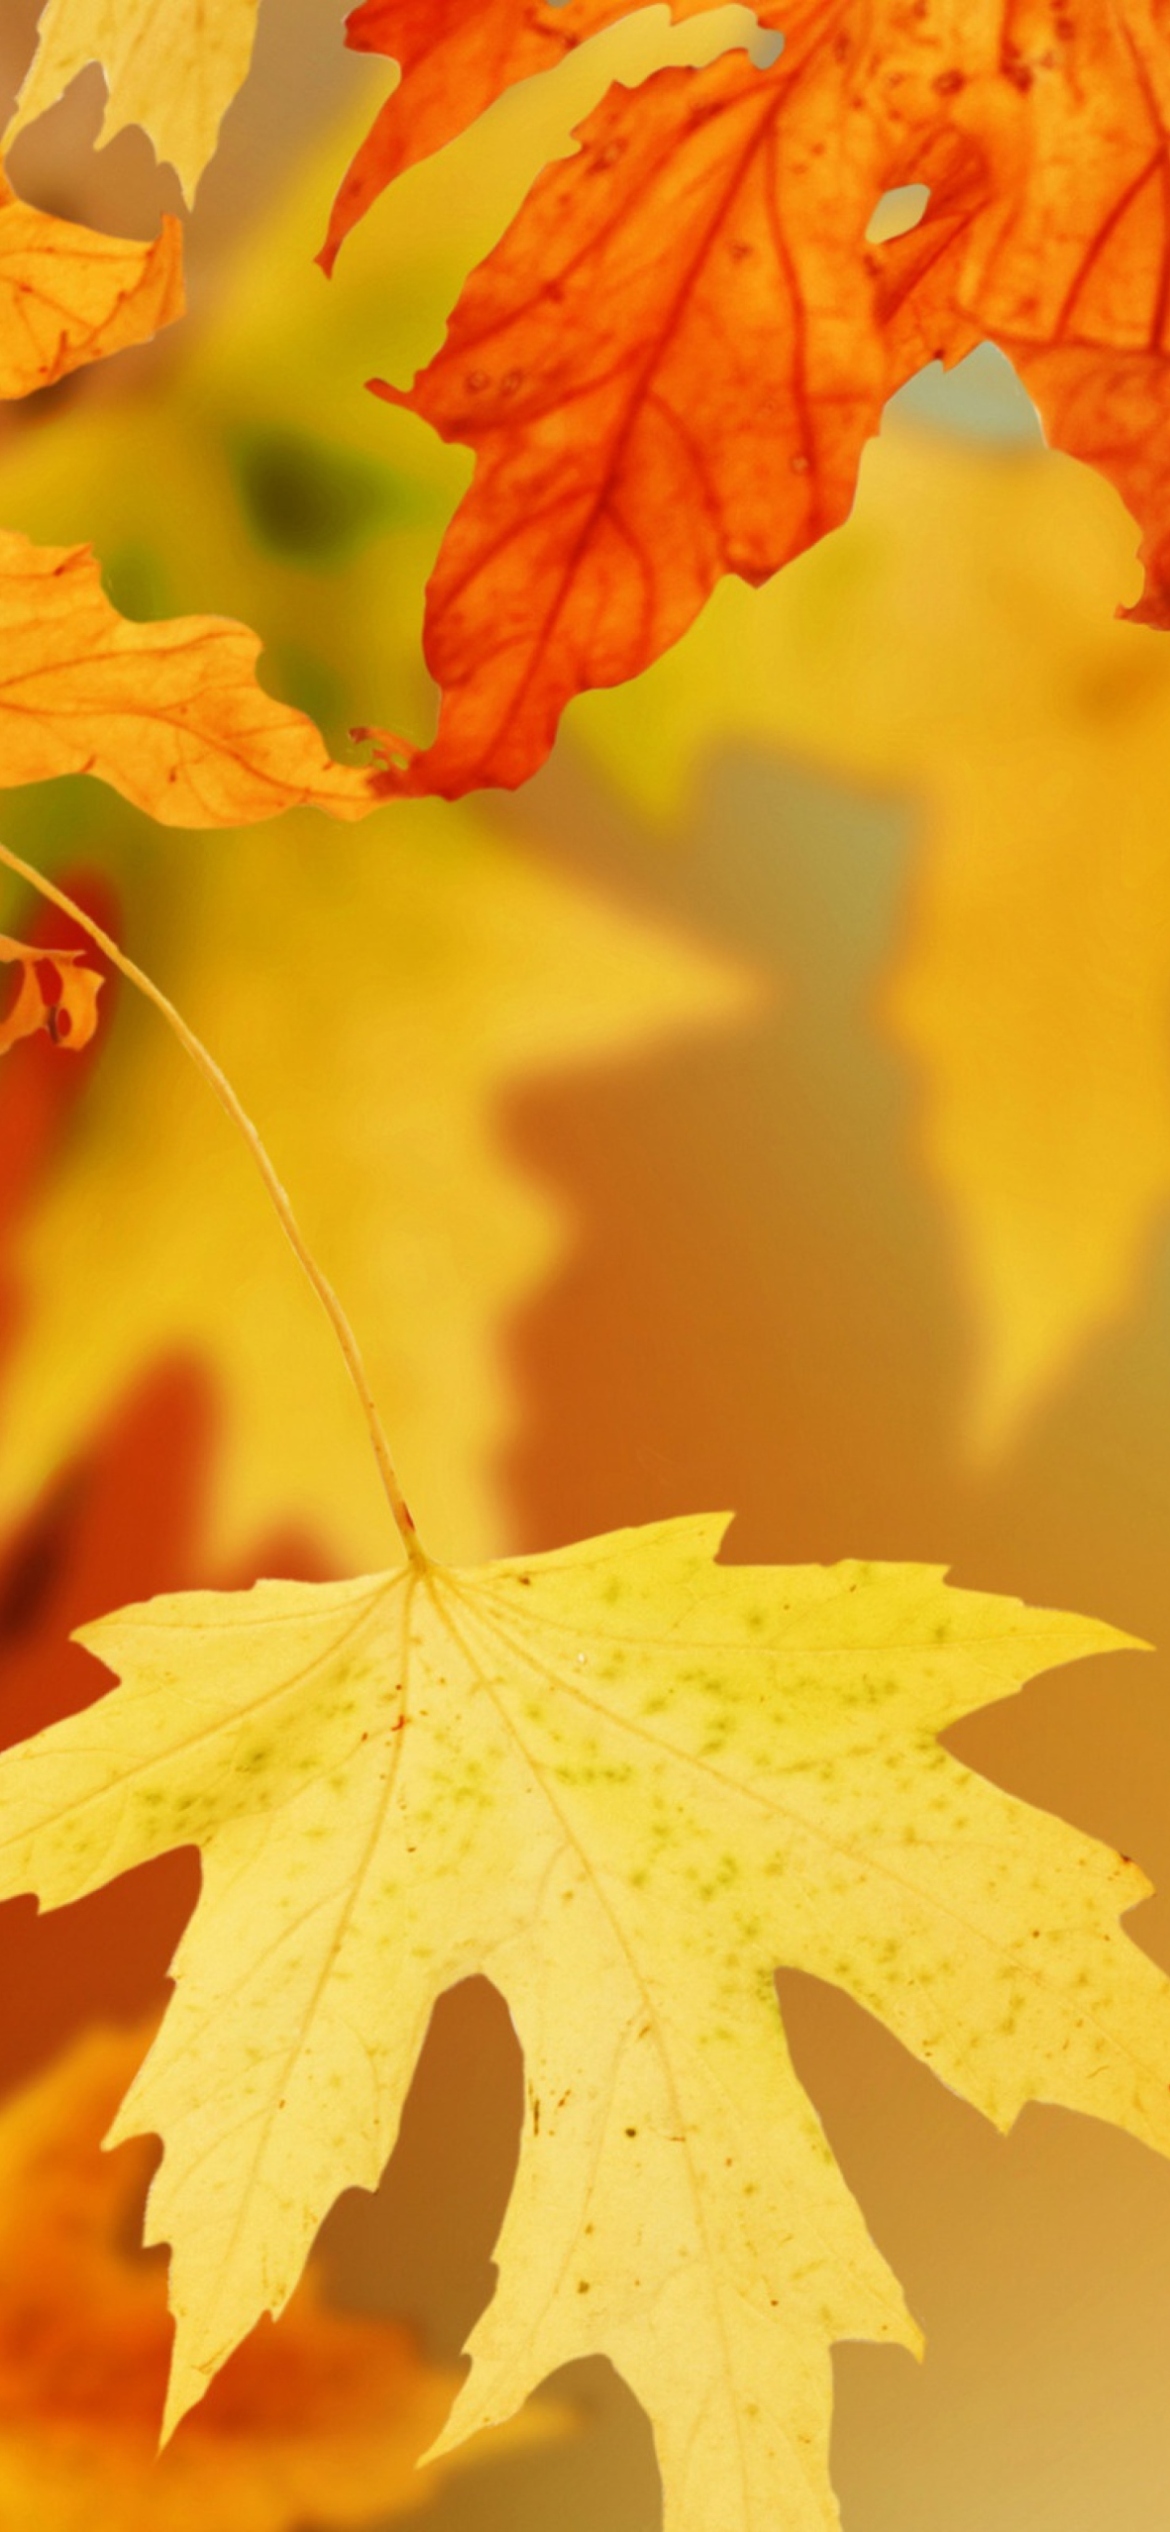 Yellow Autumn Leaves Wallpaper for iPhone 11 Pro